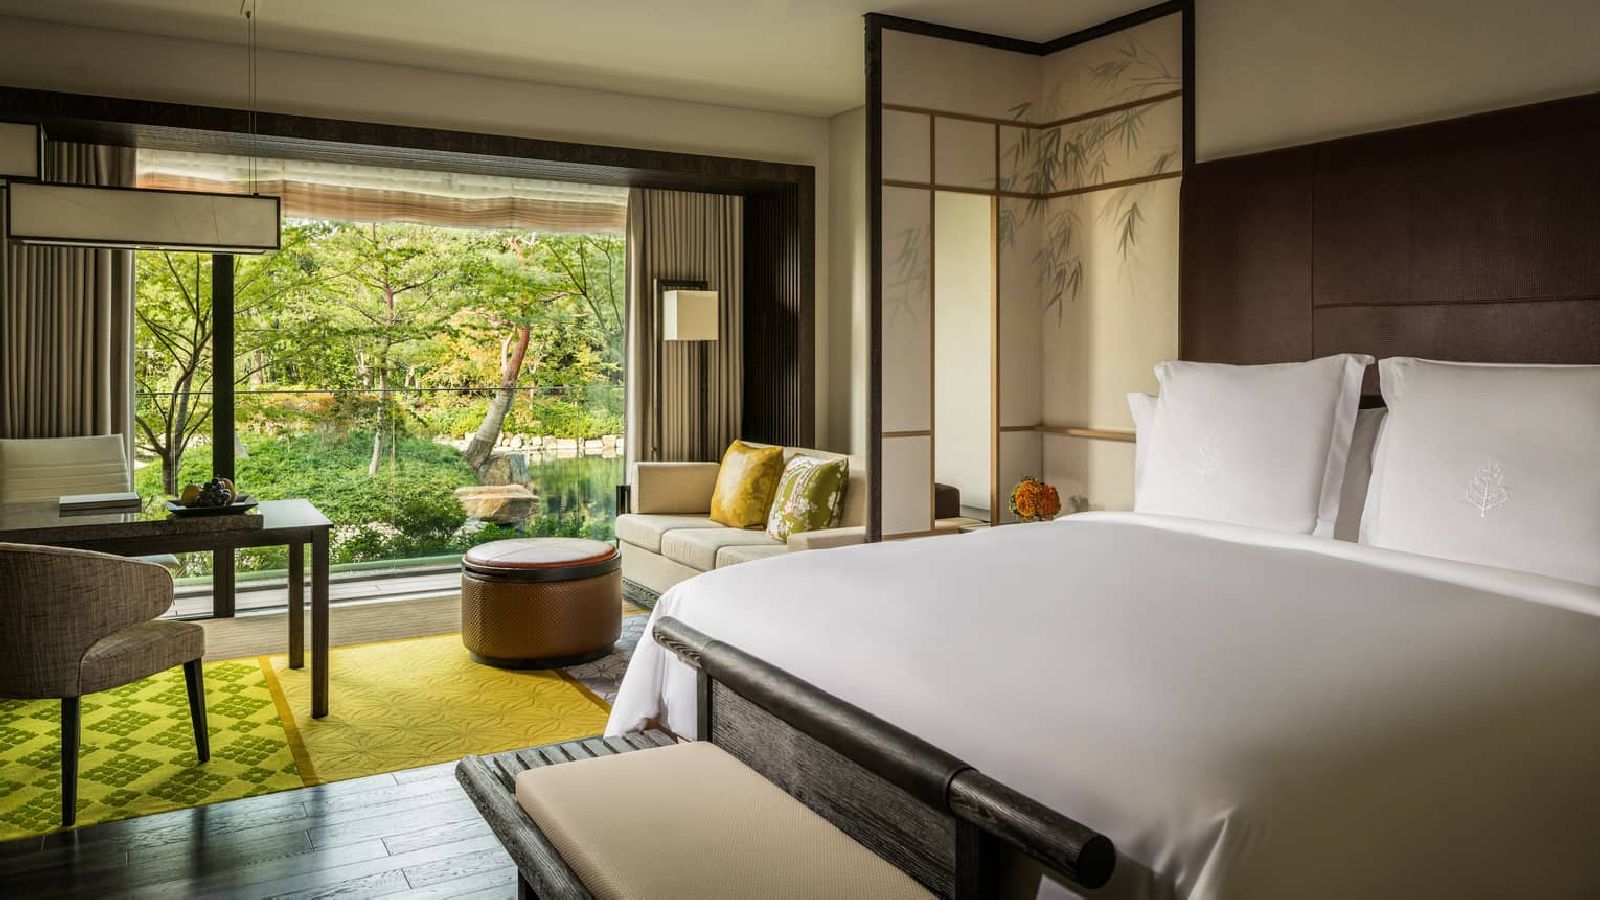 Suite with garden views at the Four Seasons Kyoto in Japan